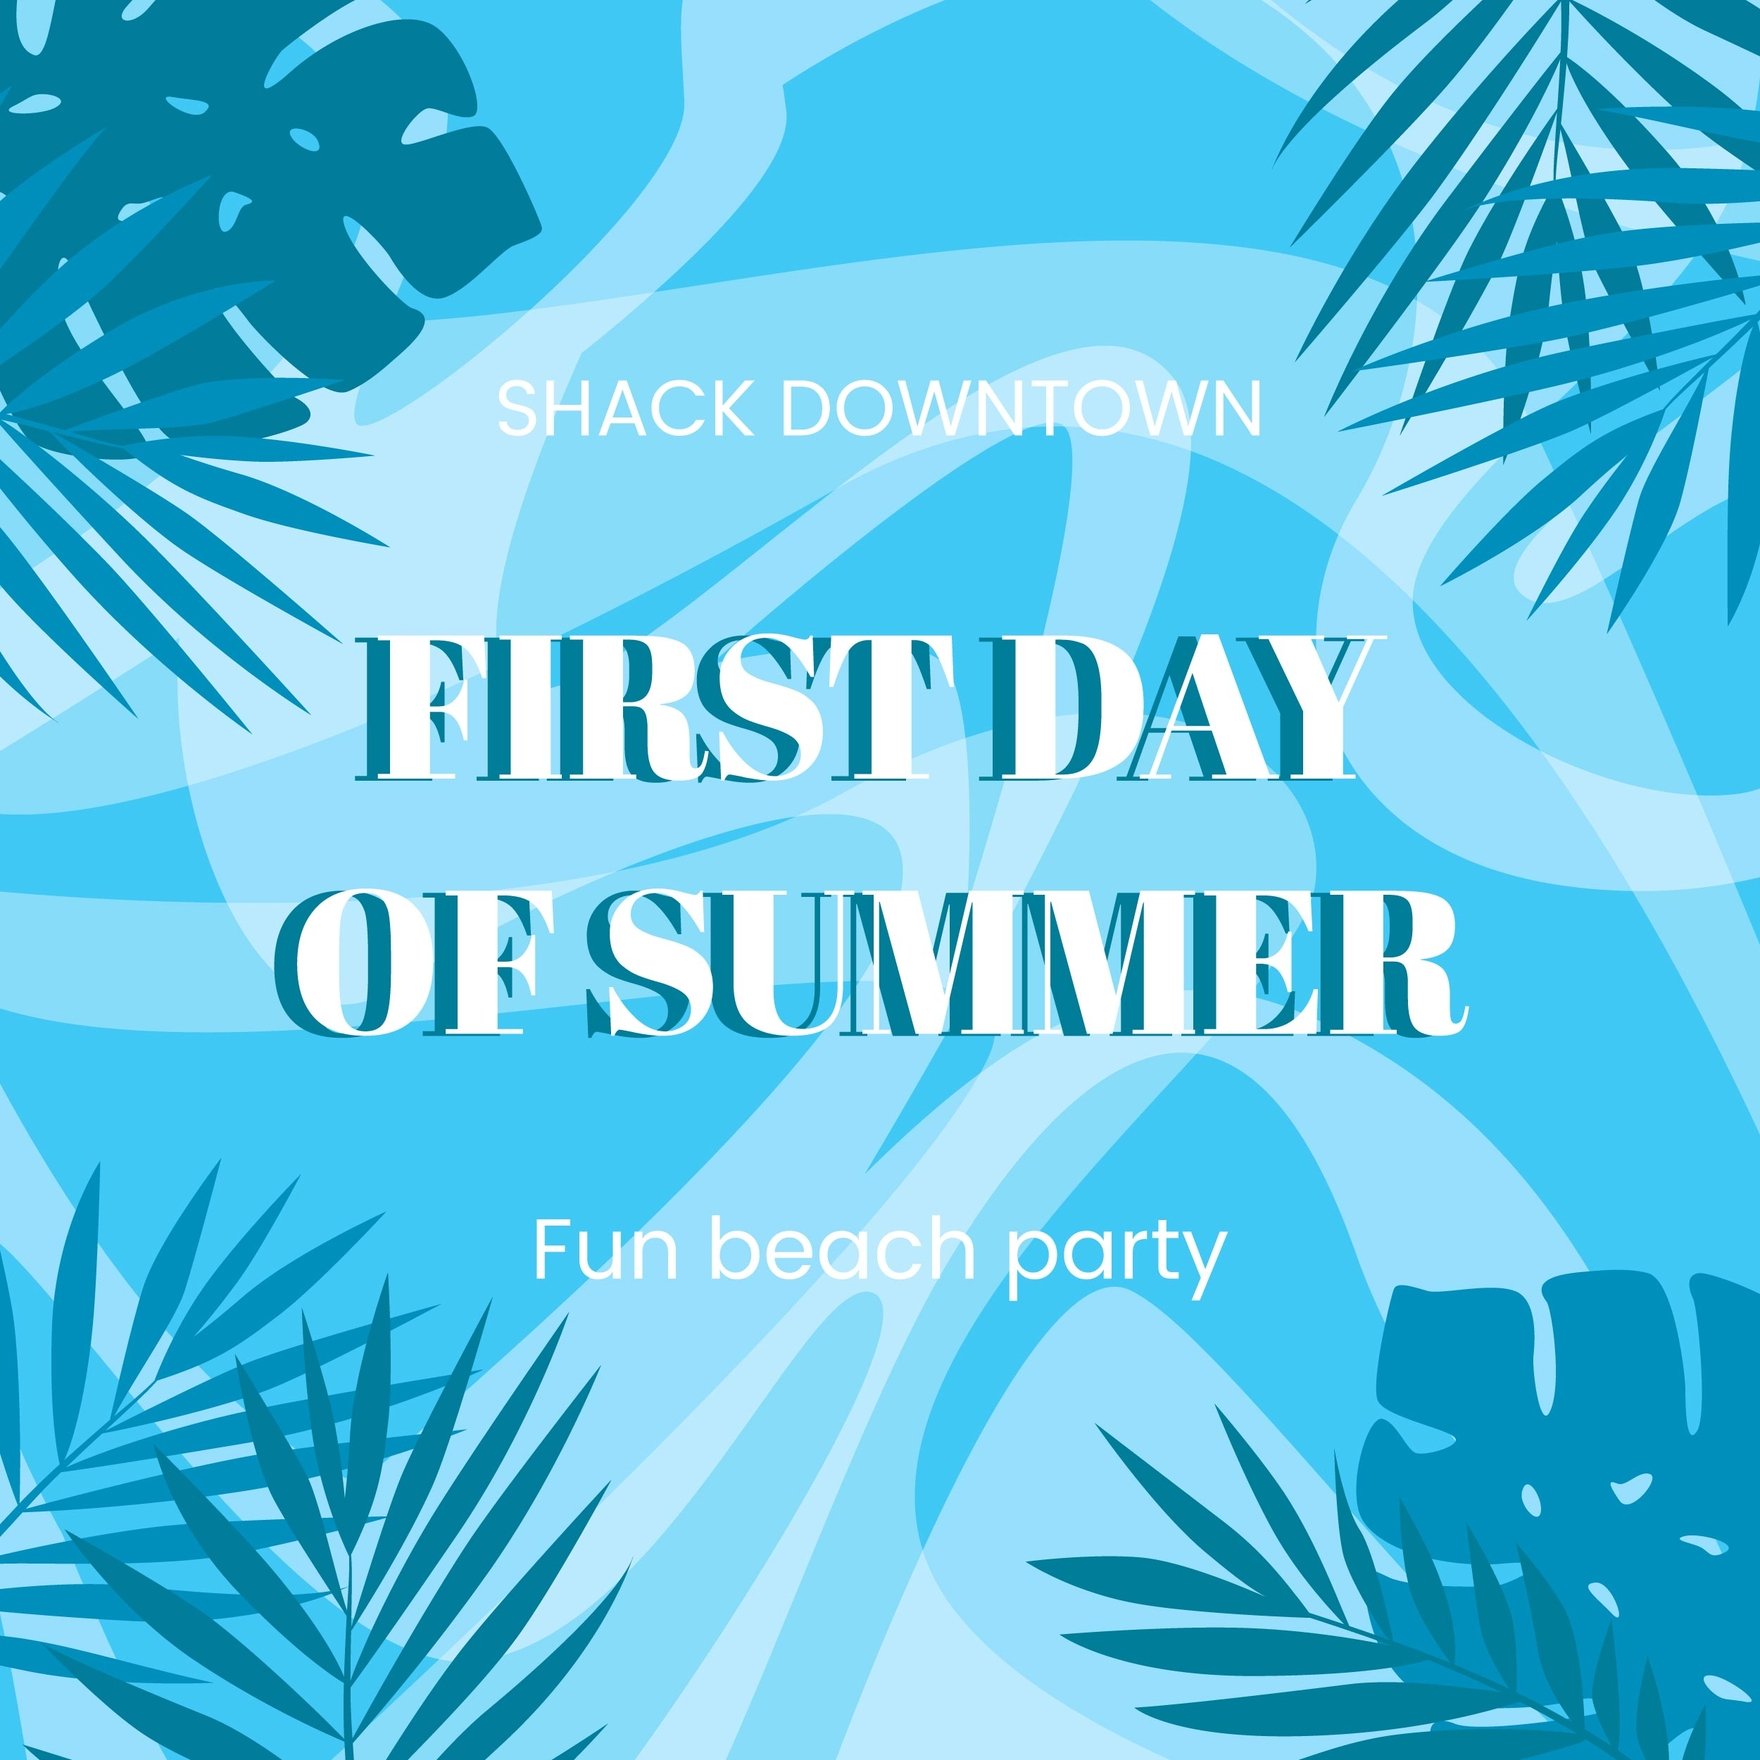 First Day of Summer Whatsapp Post in EPS, Illustrator, PSD, PNG, SVG